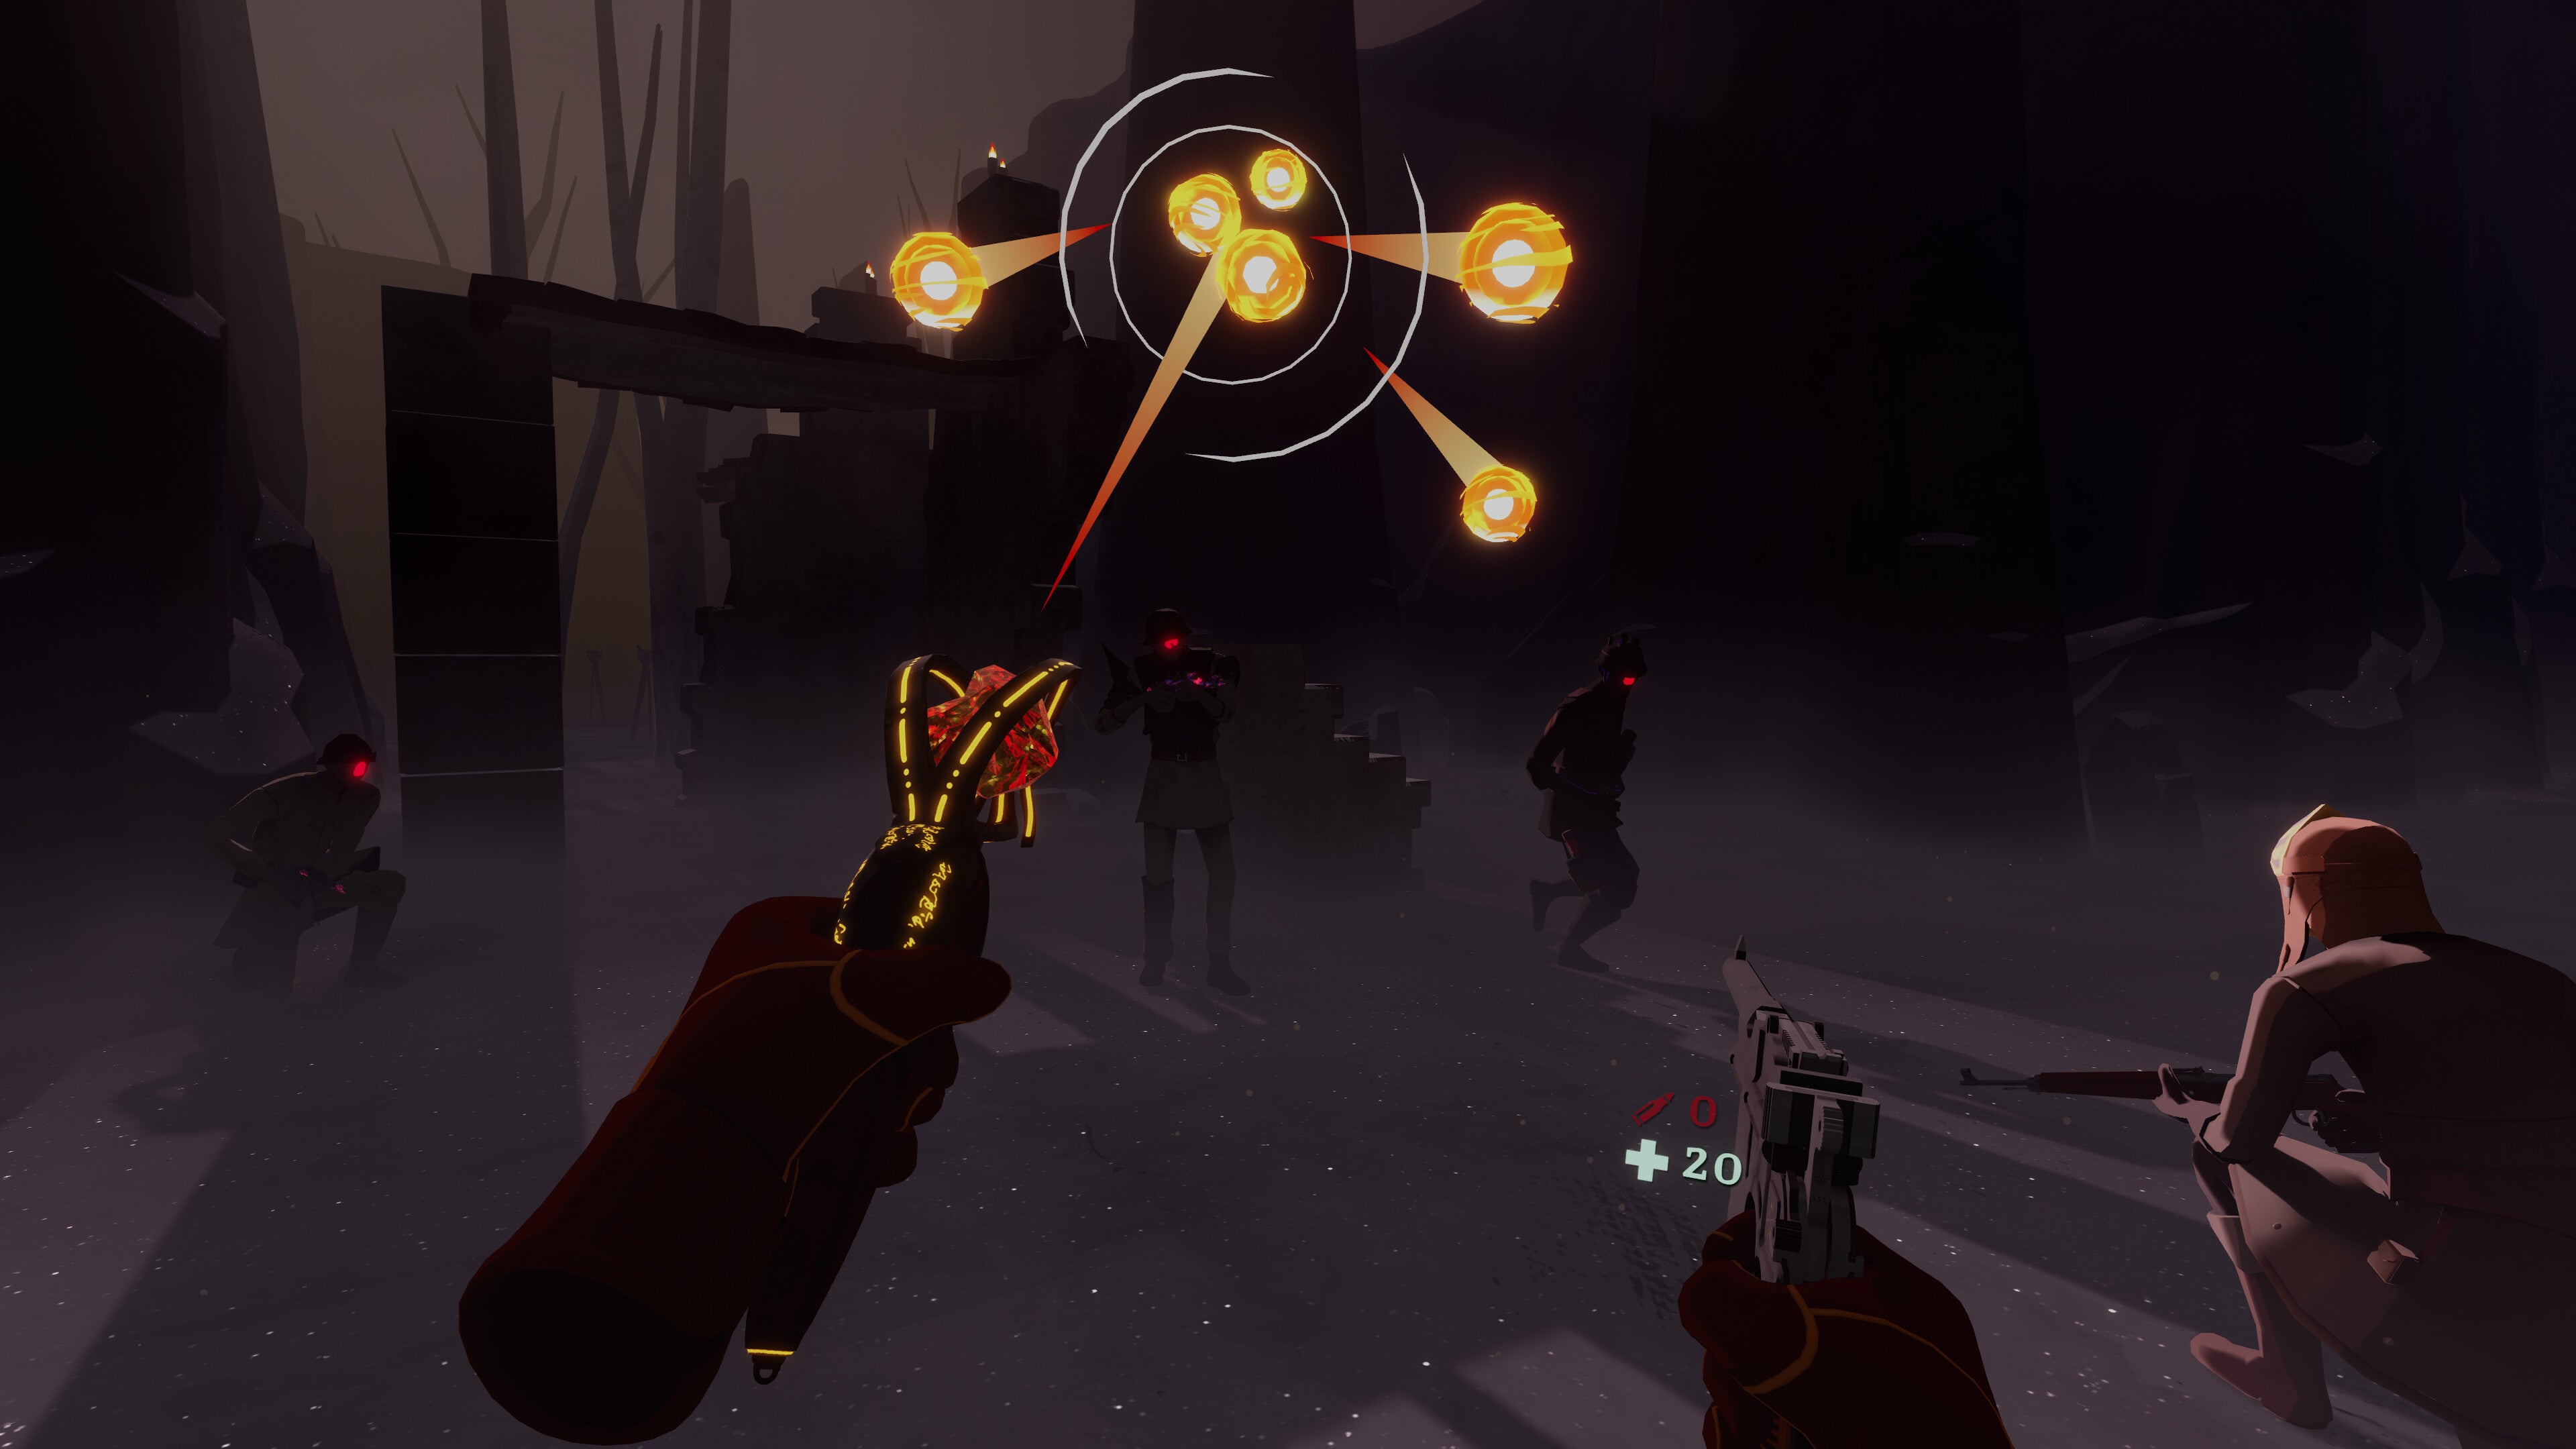 Fire a fireball light spell at some dark, red-eyed enemies in VR roguelike The Light Brigade